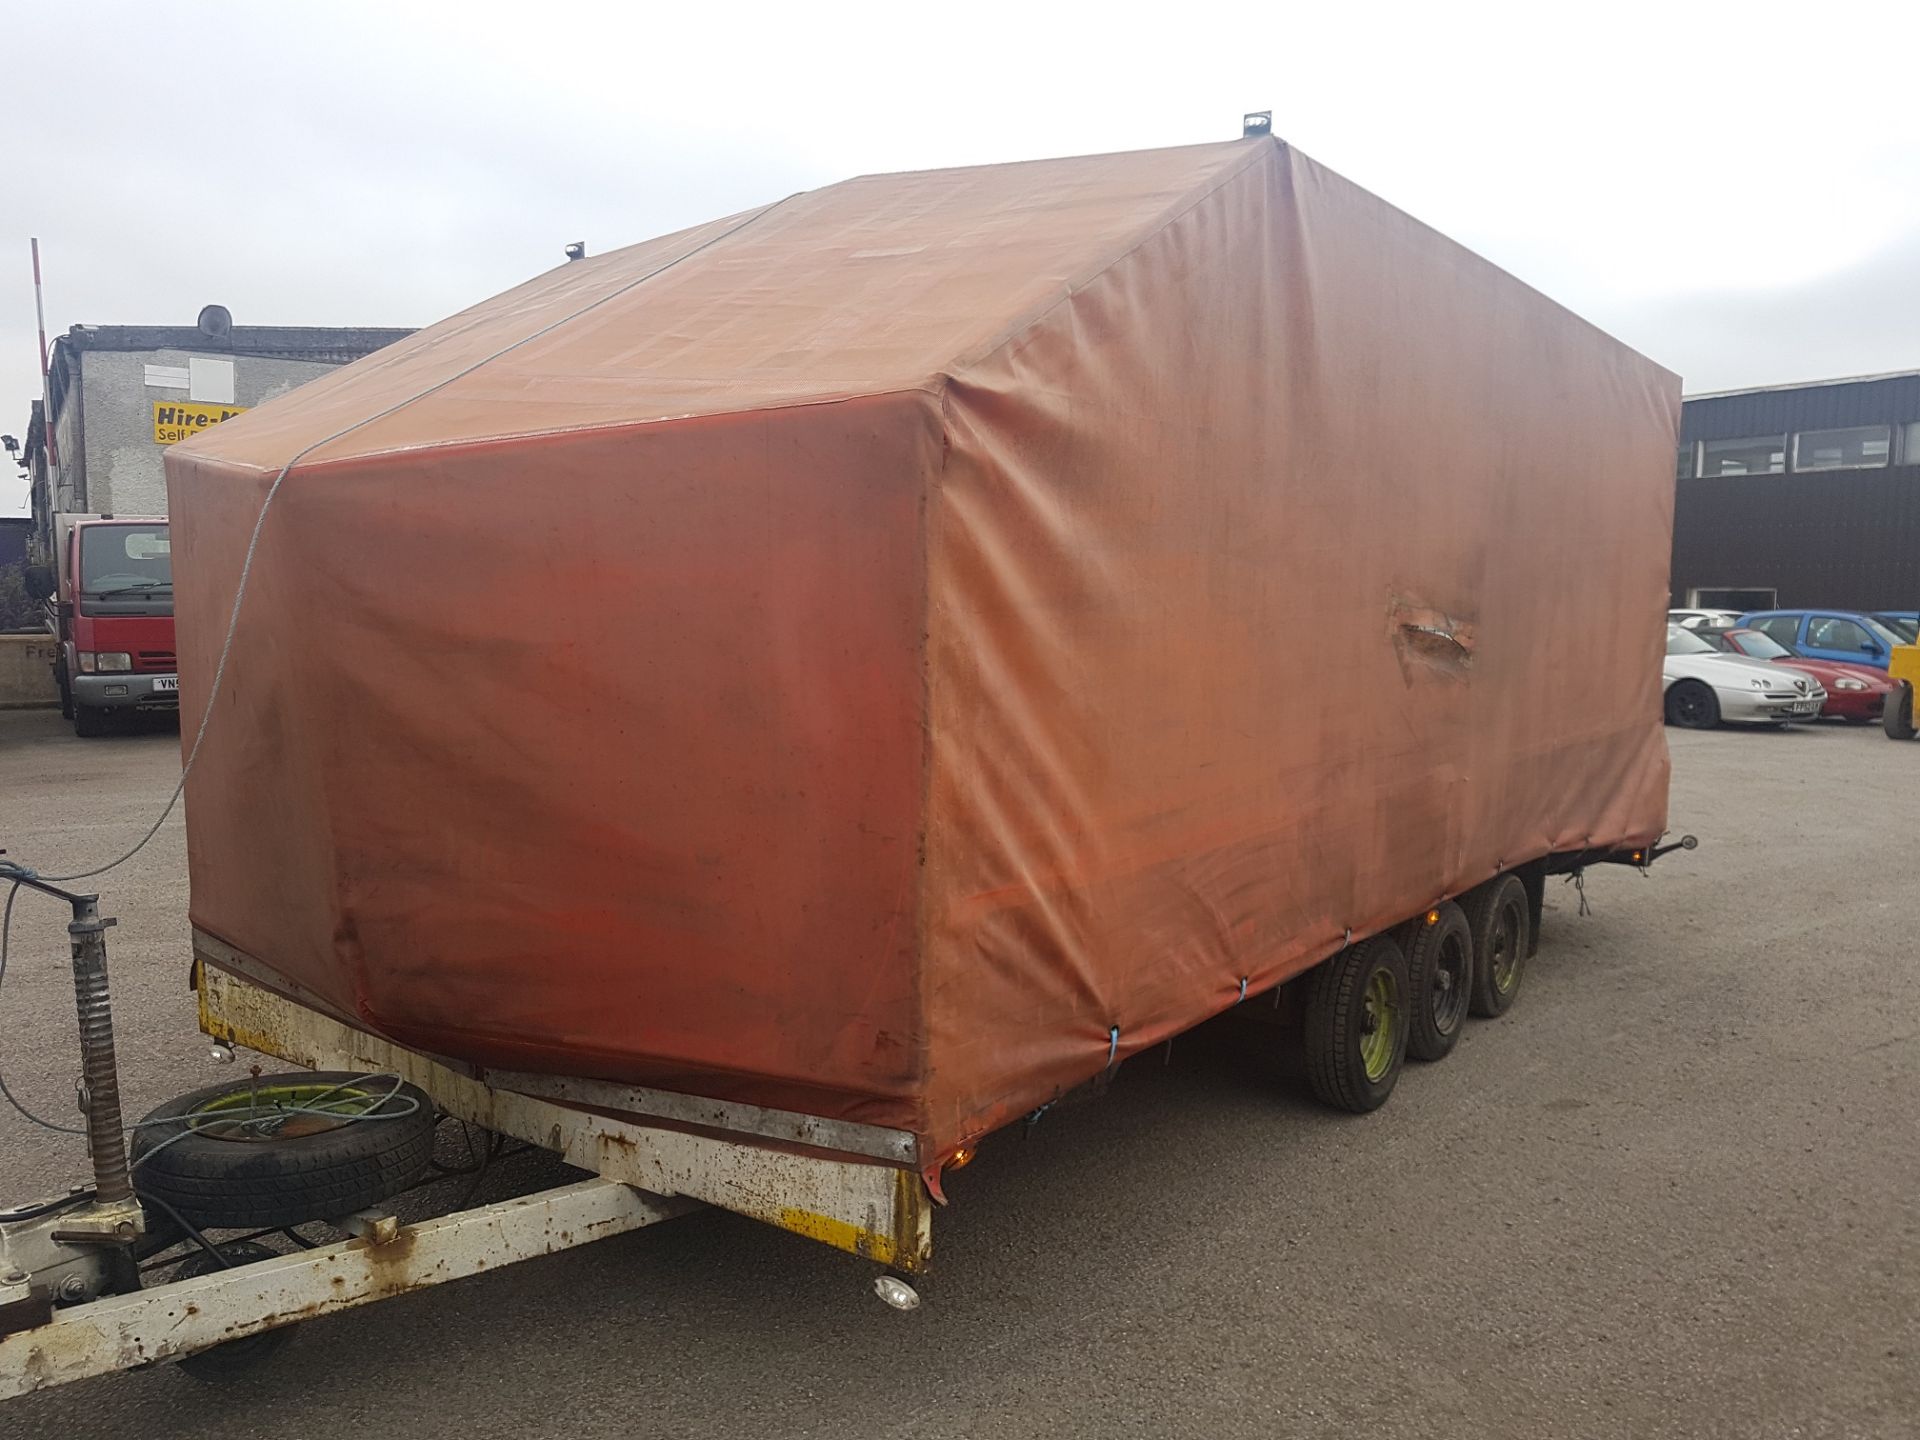 TRI-AXLE BEAVER-TAIL CAR TRANSPORTER COVERED TRAILER - 5.5 METRE BED LENGTH!  *PLUS VAT*   CAN FIT A - Image 3 of 14